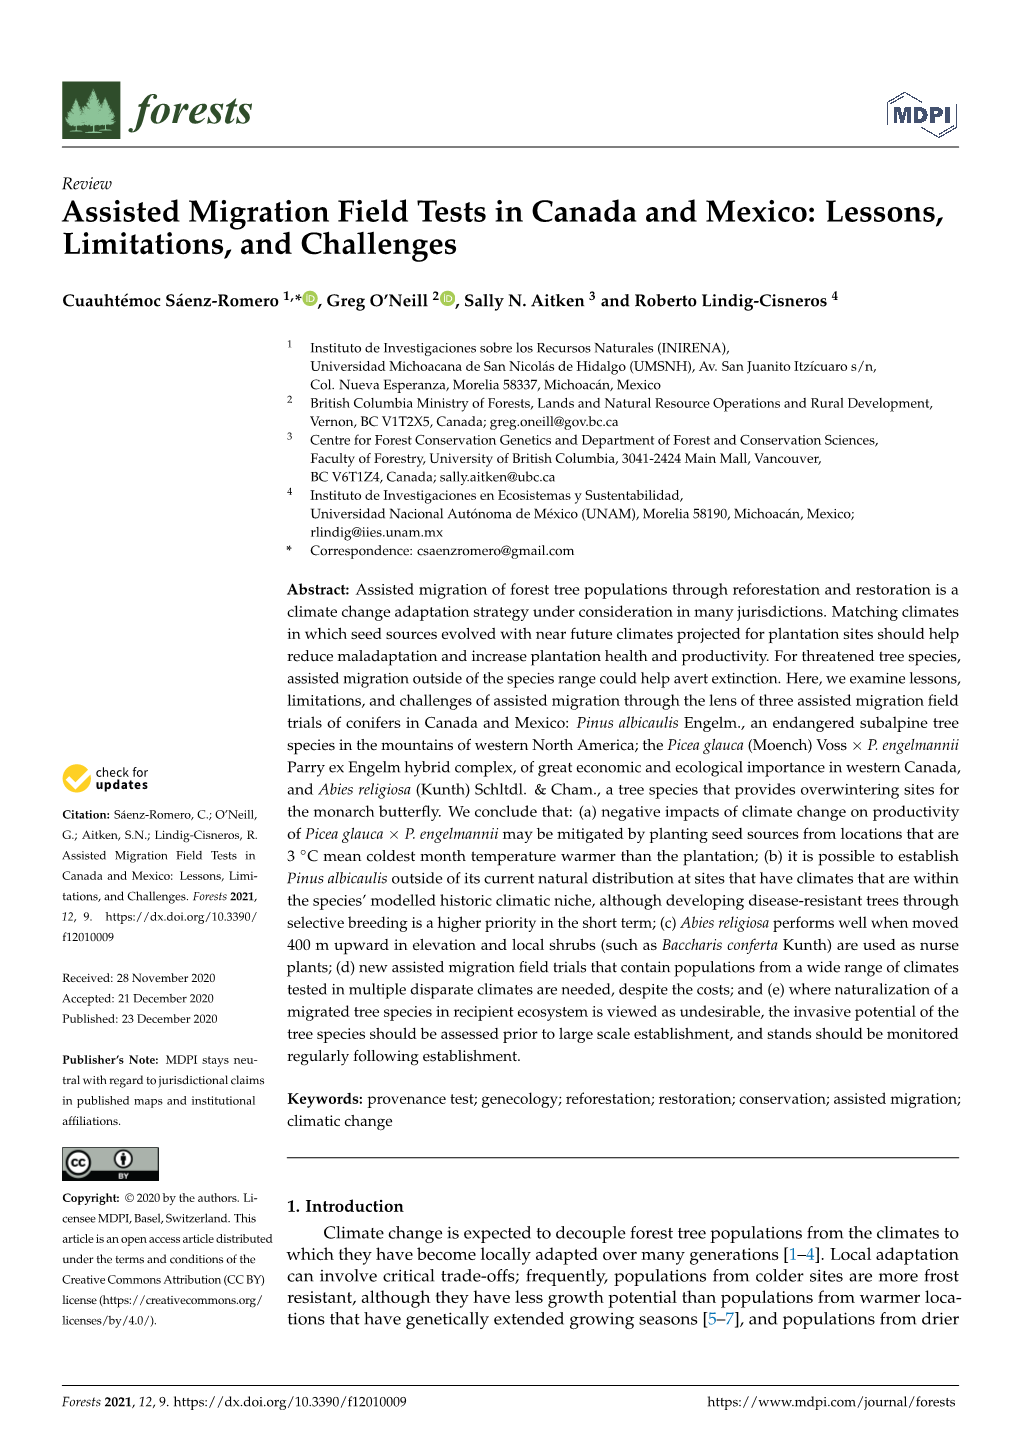 Assisted Migration Field Tests in Canada and Mexico: Lessons, Limitations, and Challenges